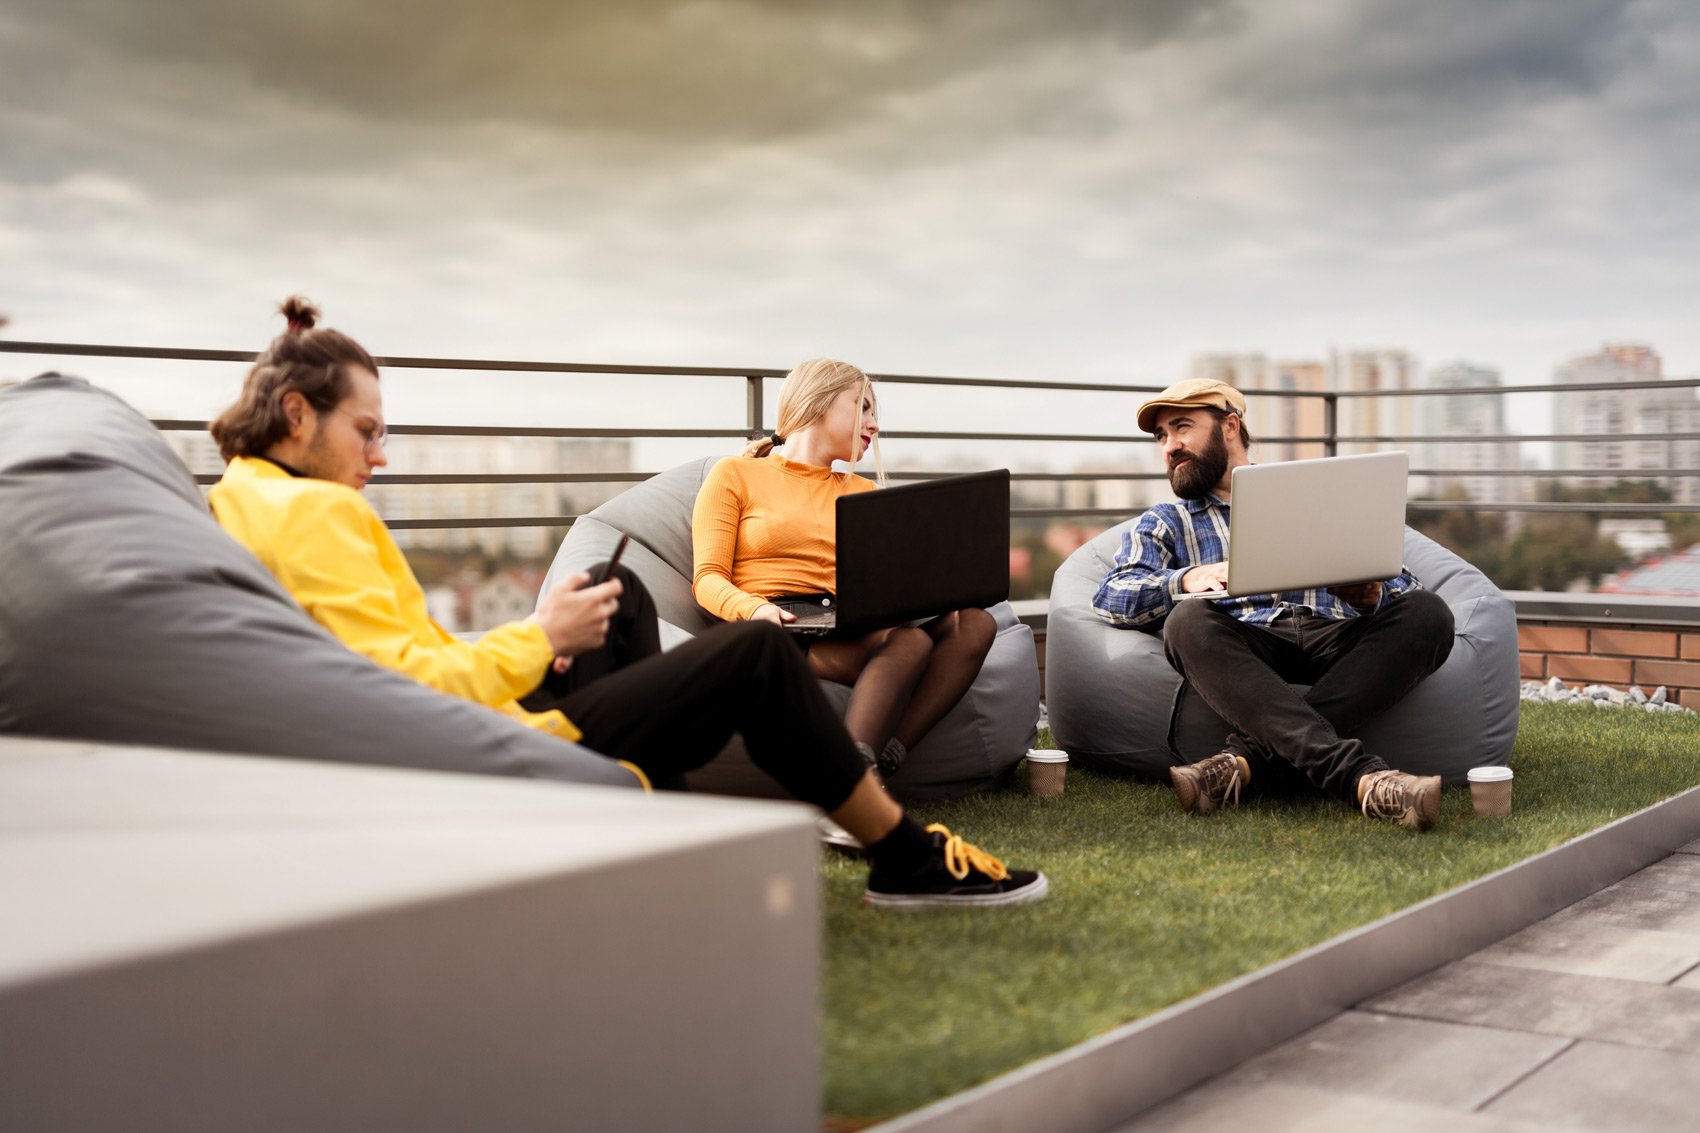 Workplace Benefits for Millennials - Group of People Working Outside